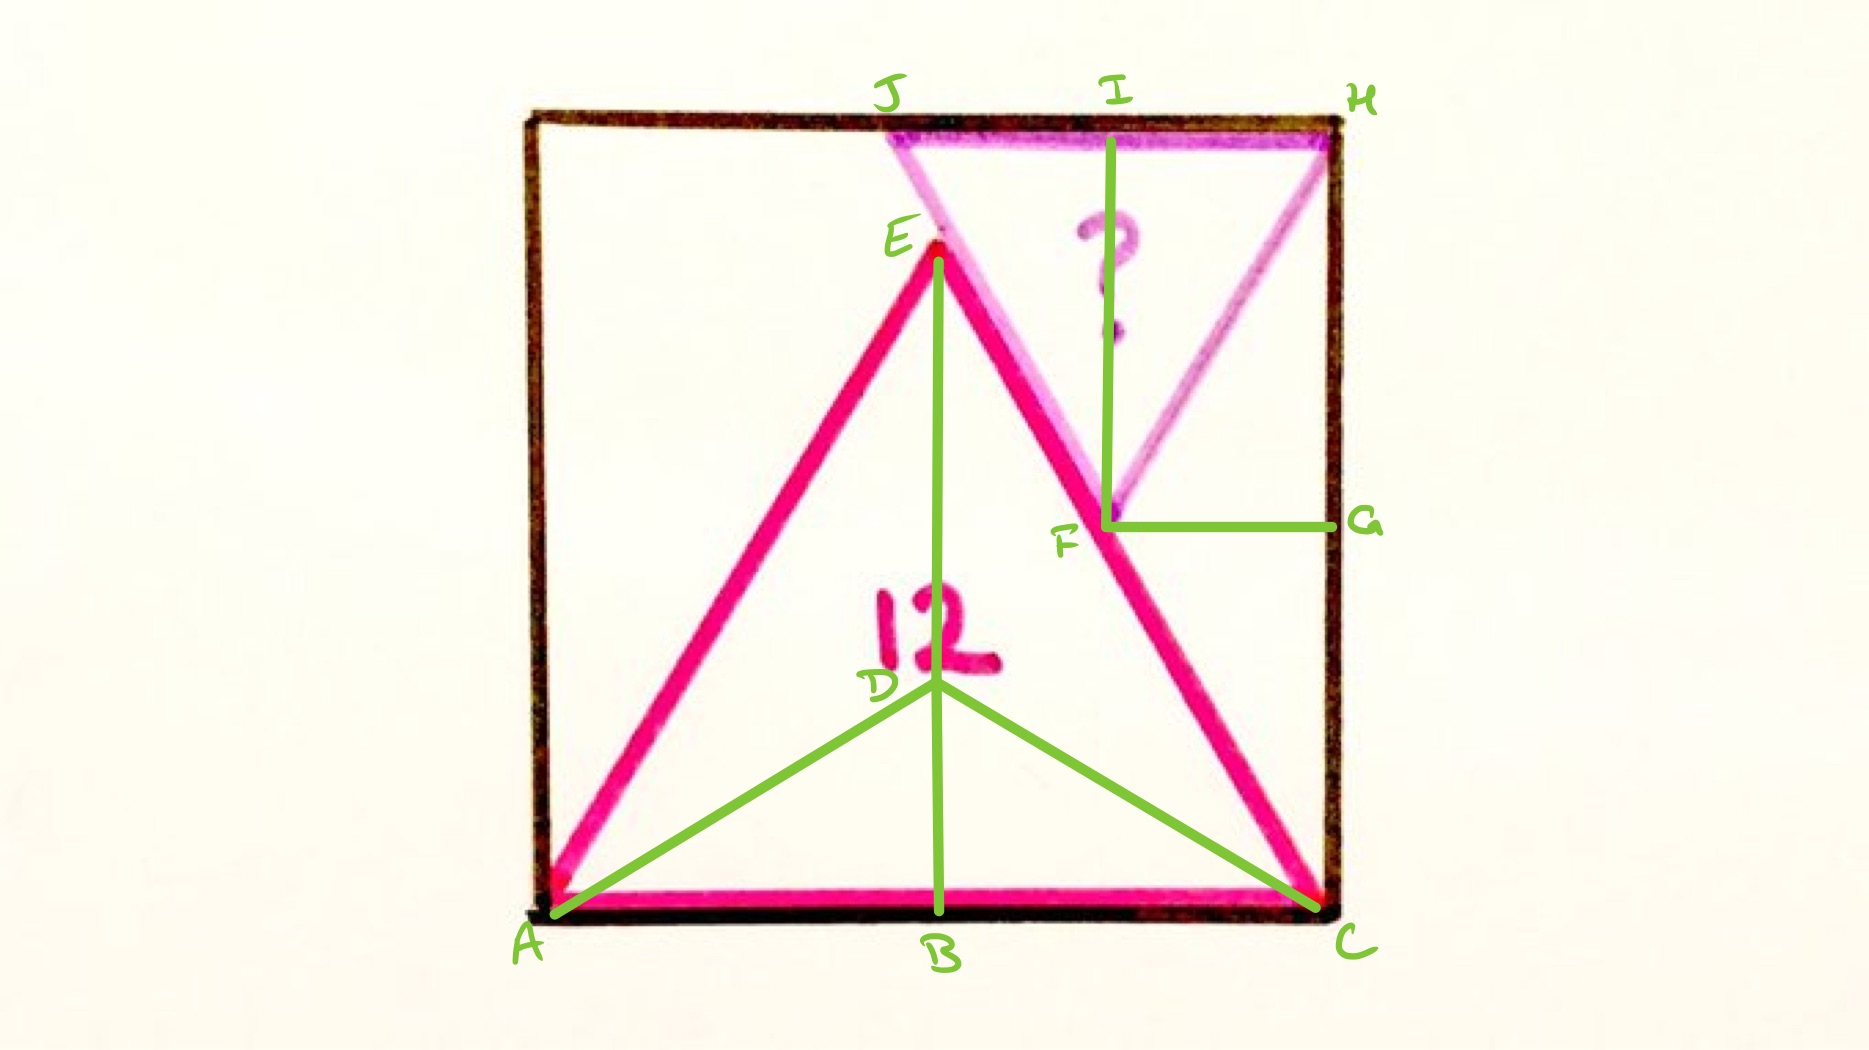 Equilateral triangles in a square labelled